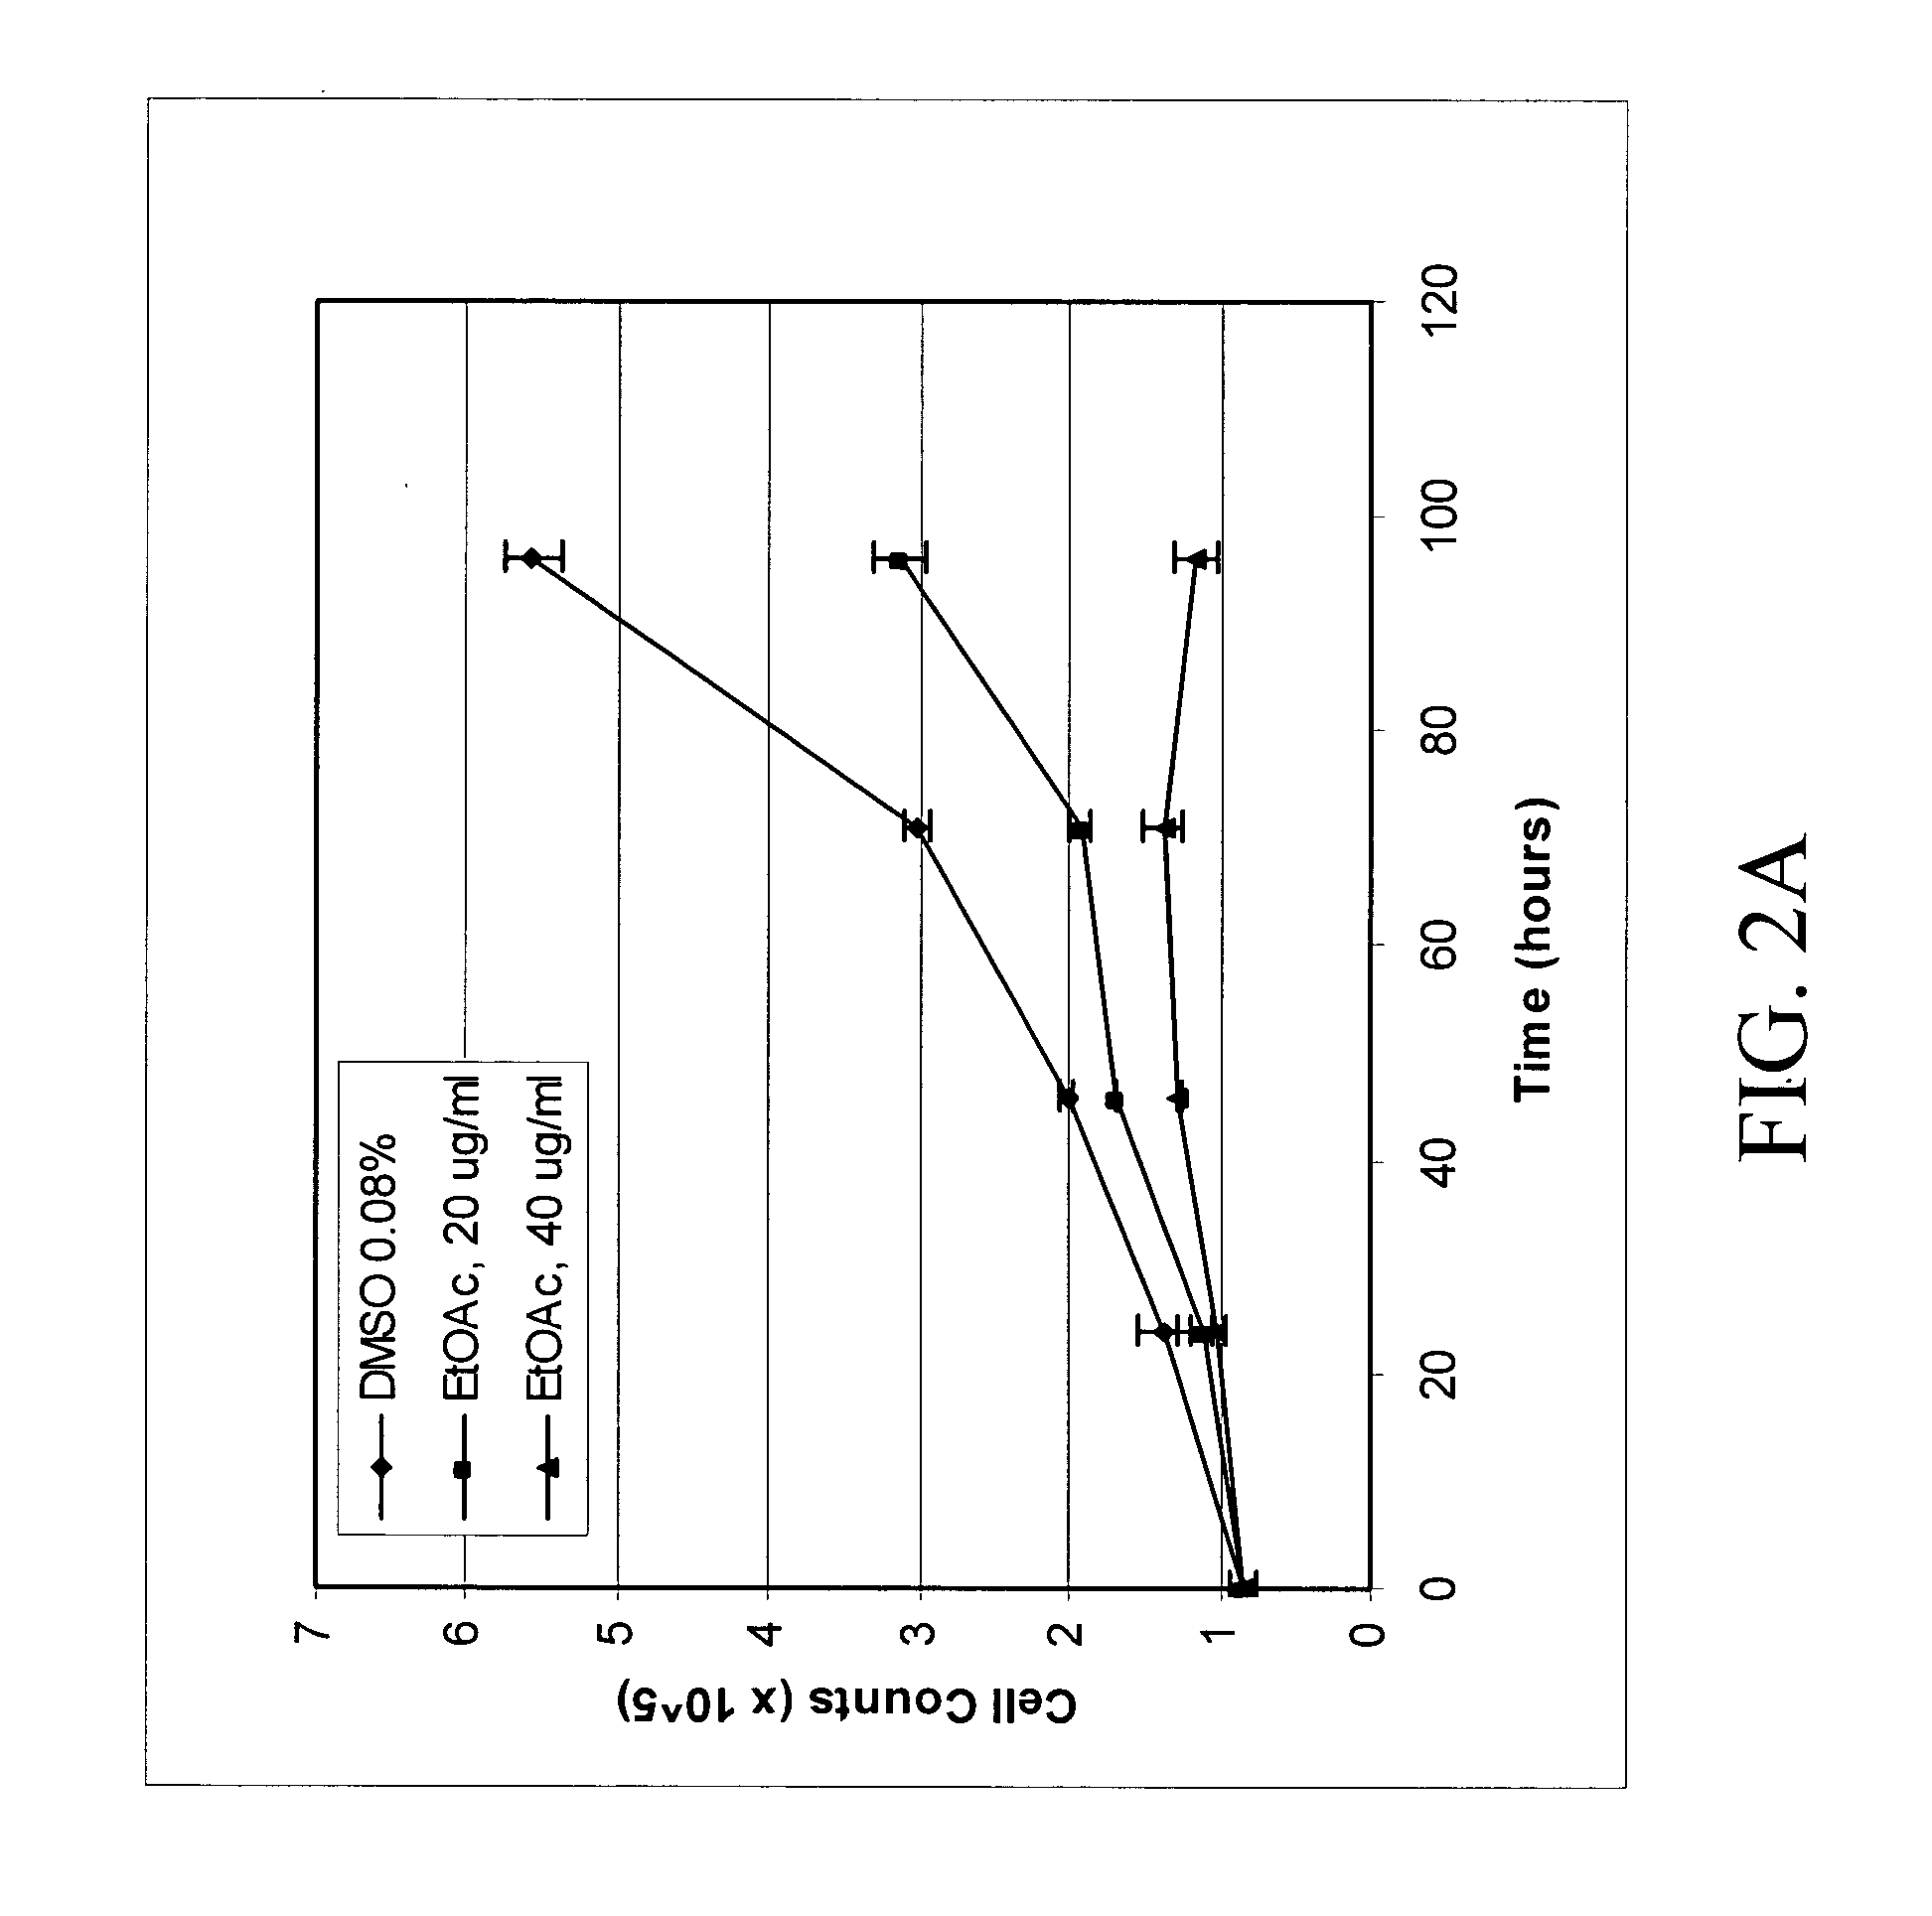 Anti-neoplastic compositions comprising extracts of black cohosh